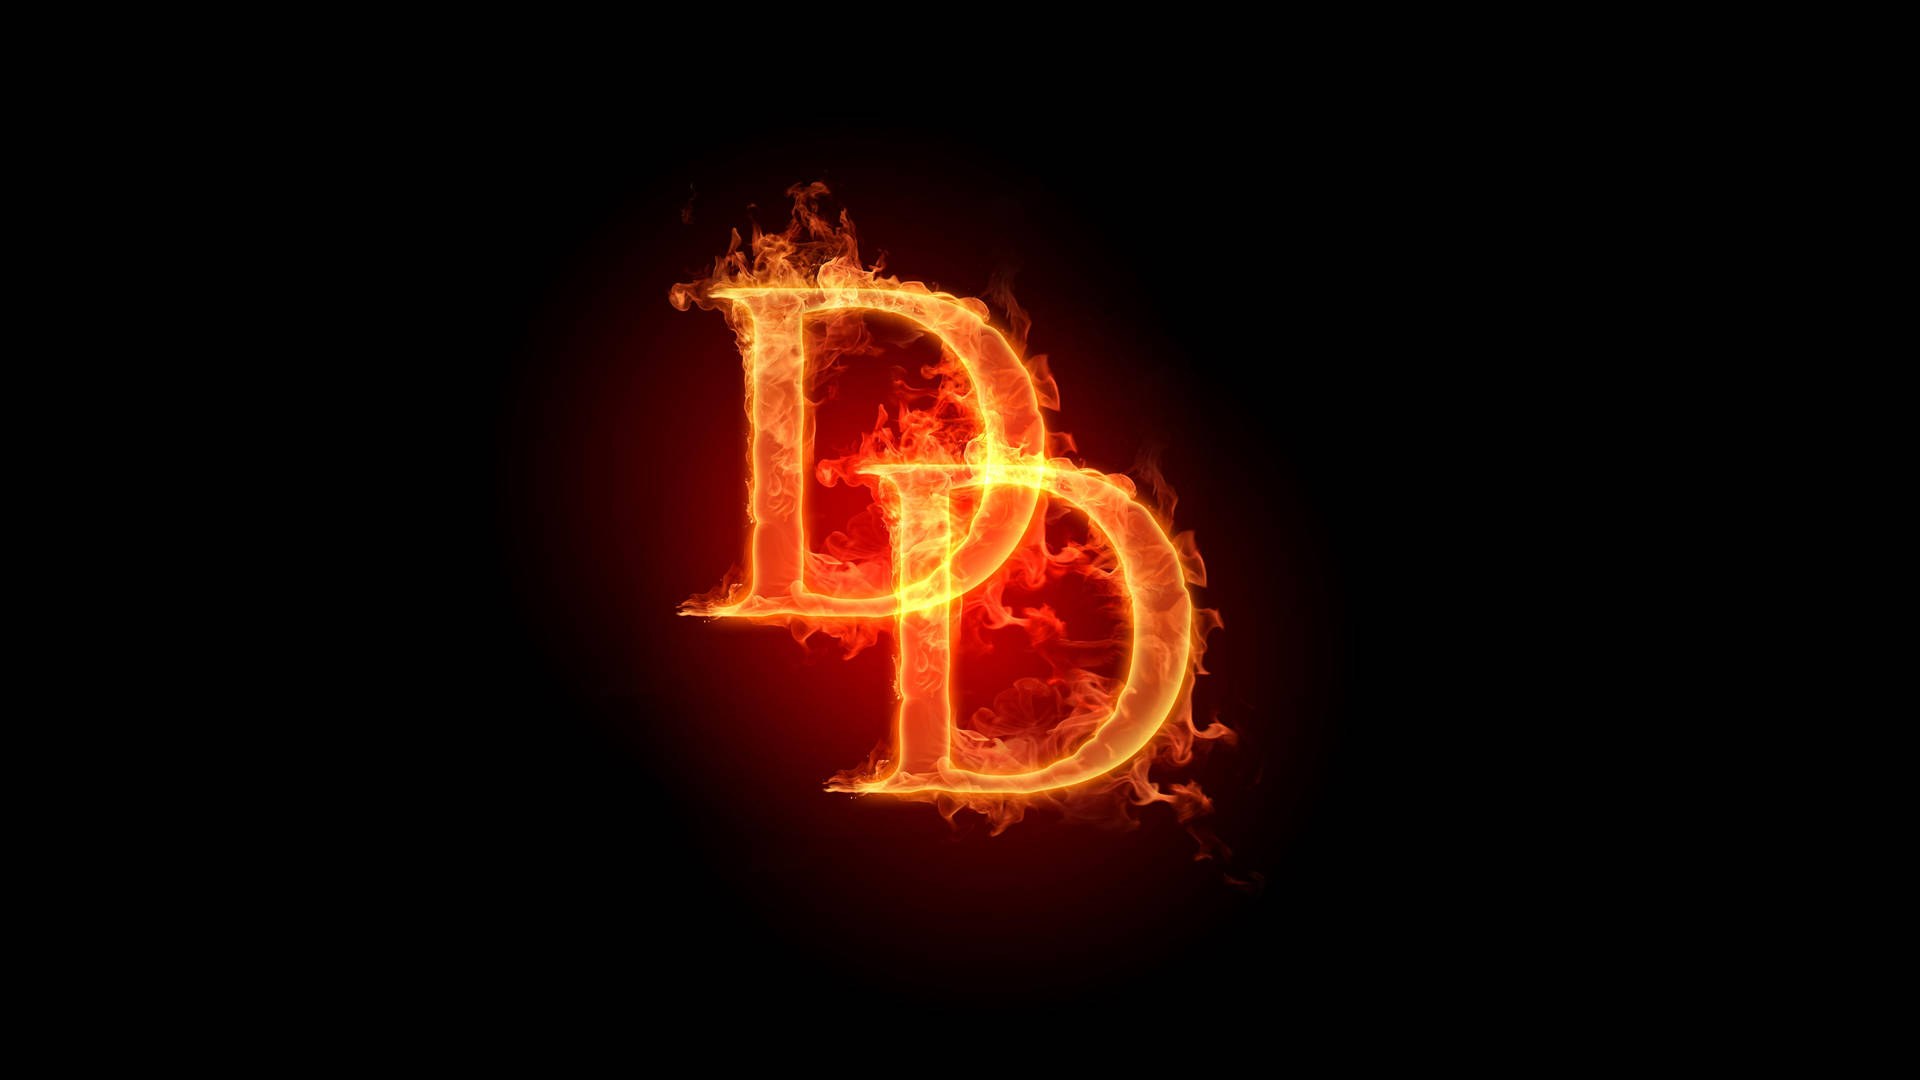 Two Burning D Scripts On Black Background